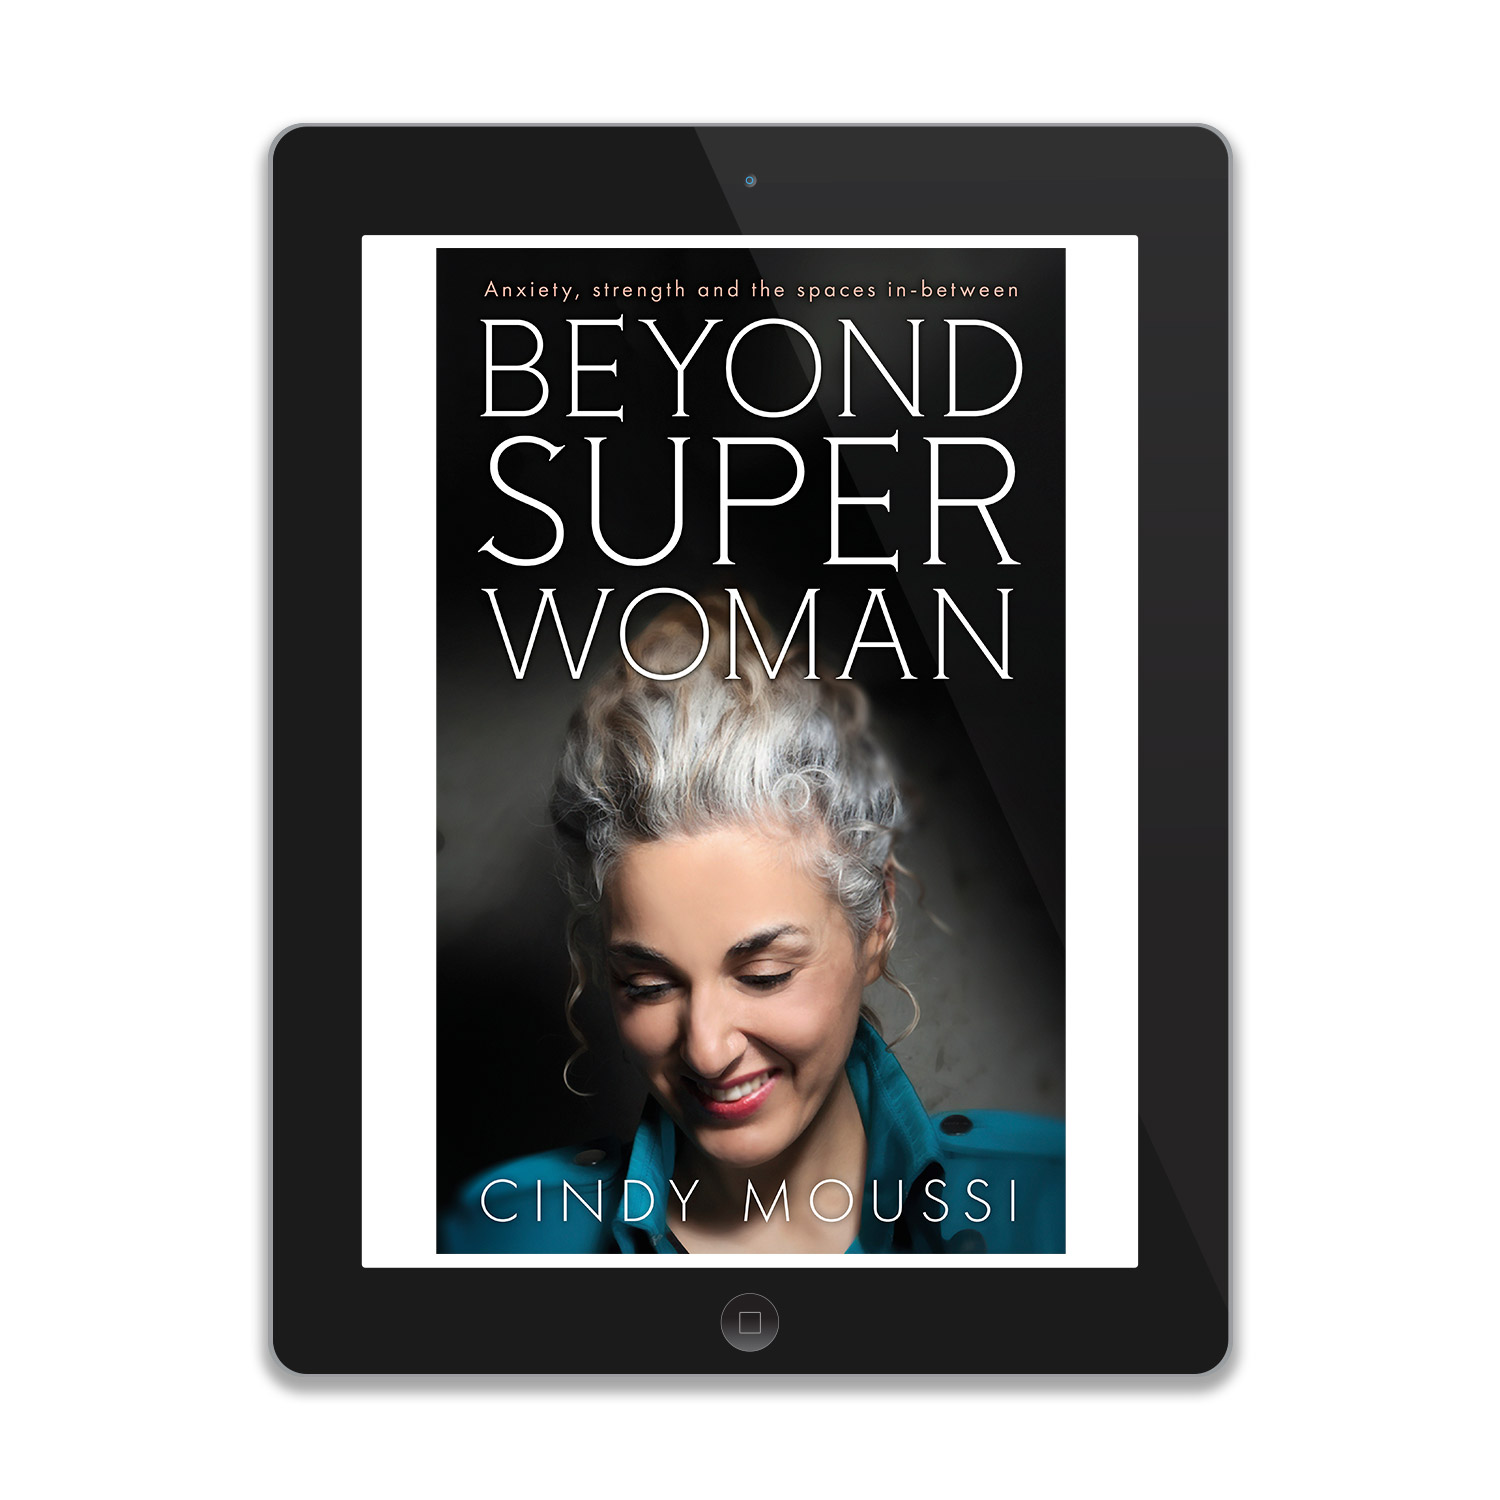 'Beyond Super Woman' is a deeply personal autobiography. The book cover was designed by Mark Thomas, of coverness.com. To find out more about my book design services, please visit www.coverness.com.